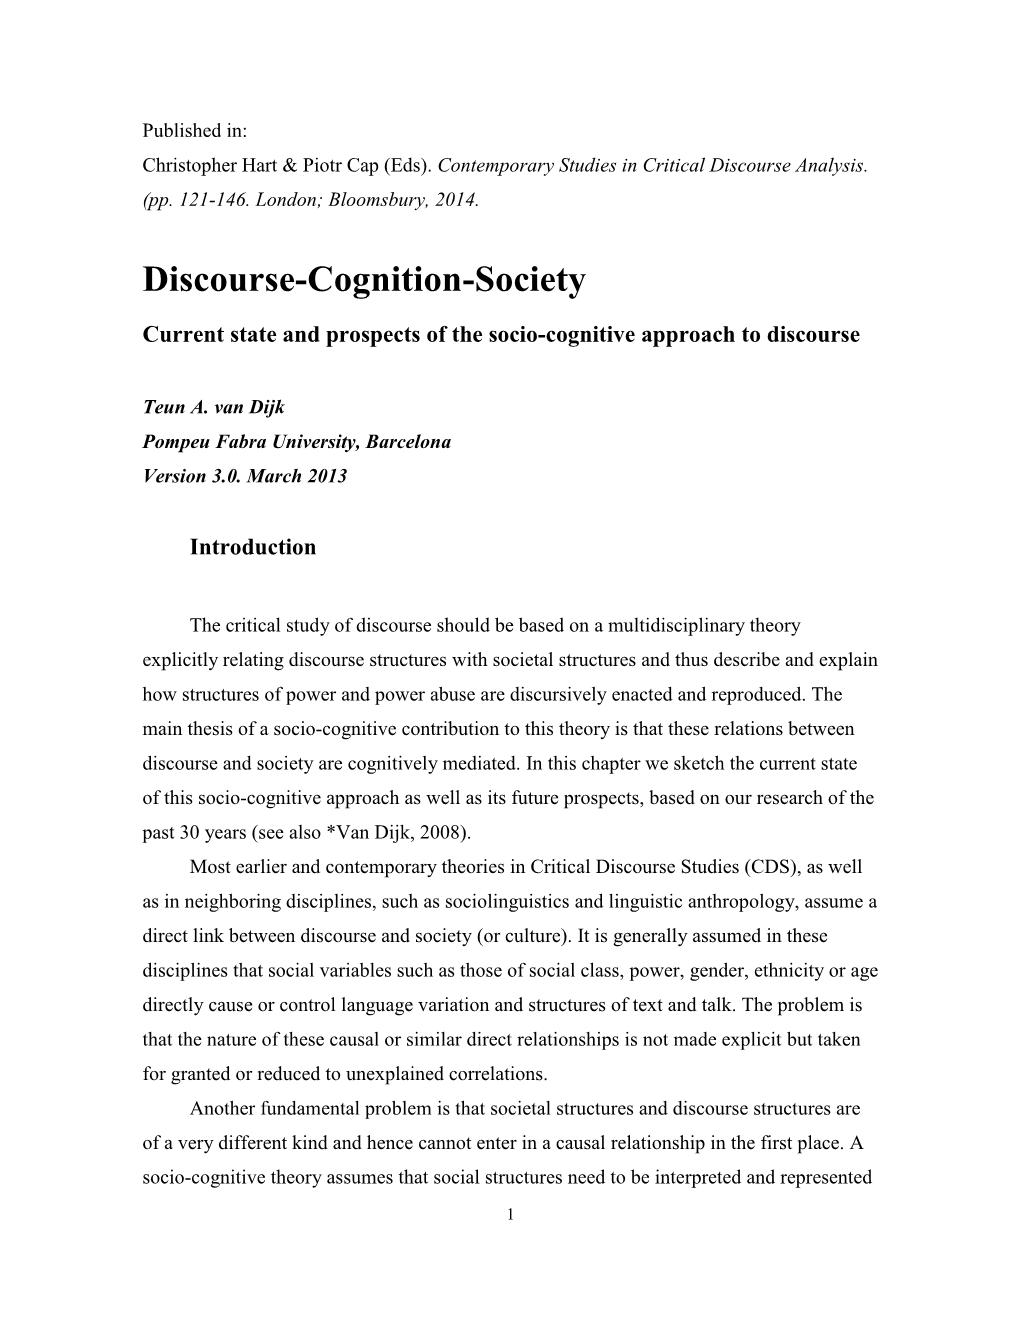 Discourse-Cognition-Society